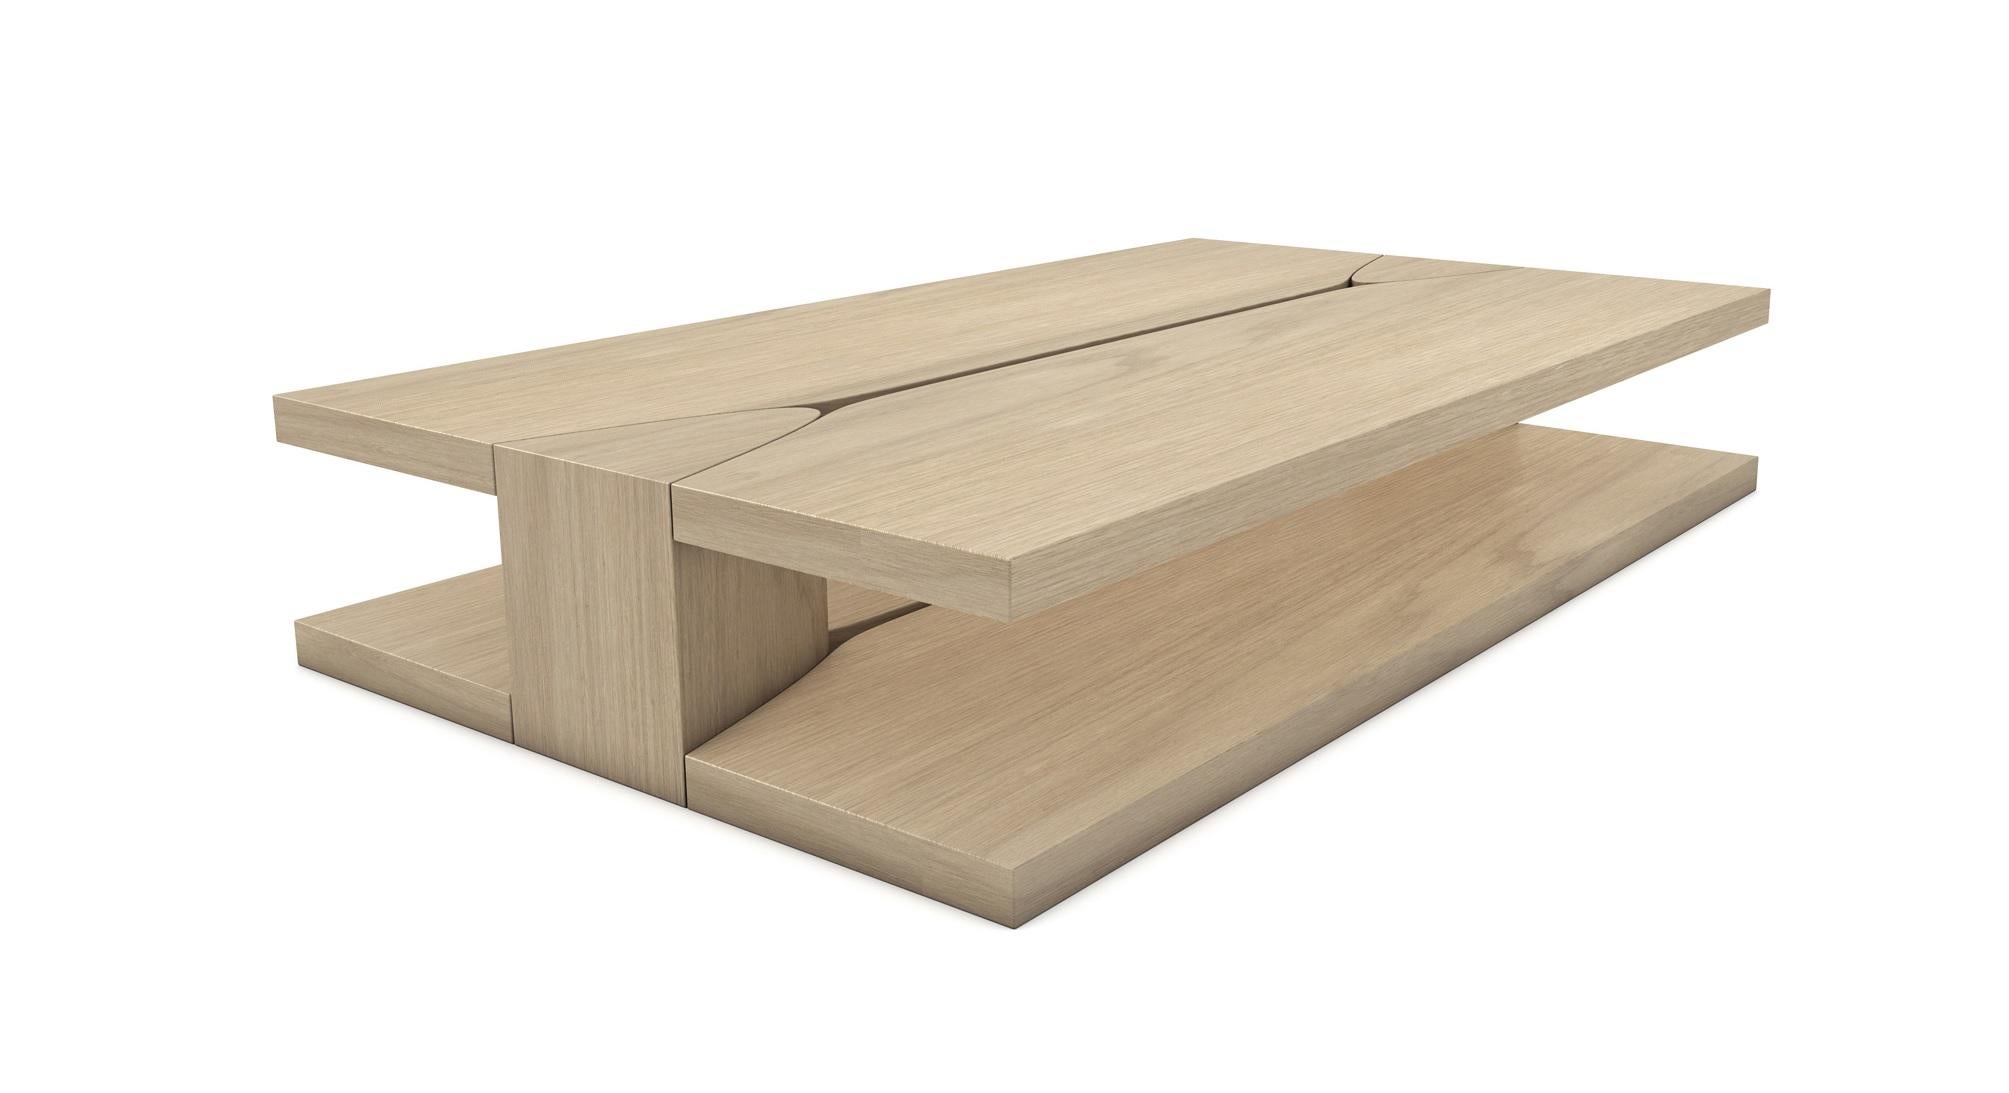 Oak amarante low table by LK Edition.
Limited Edition. 
Dimensions: 180 x 110 x H 40 cm 
Materials: Oak. 
Also available in brushed oak. 

It is with the sense of detail and requirement, this research of the exception by the selection of noble